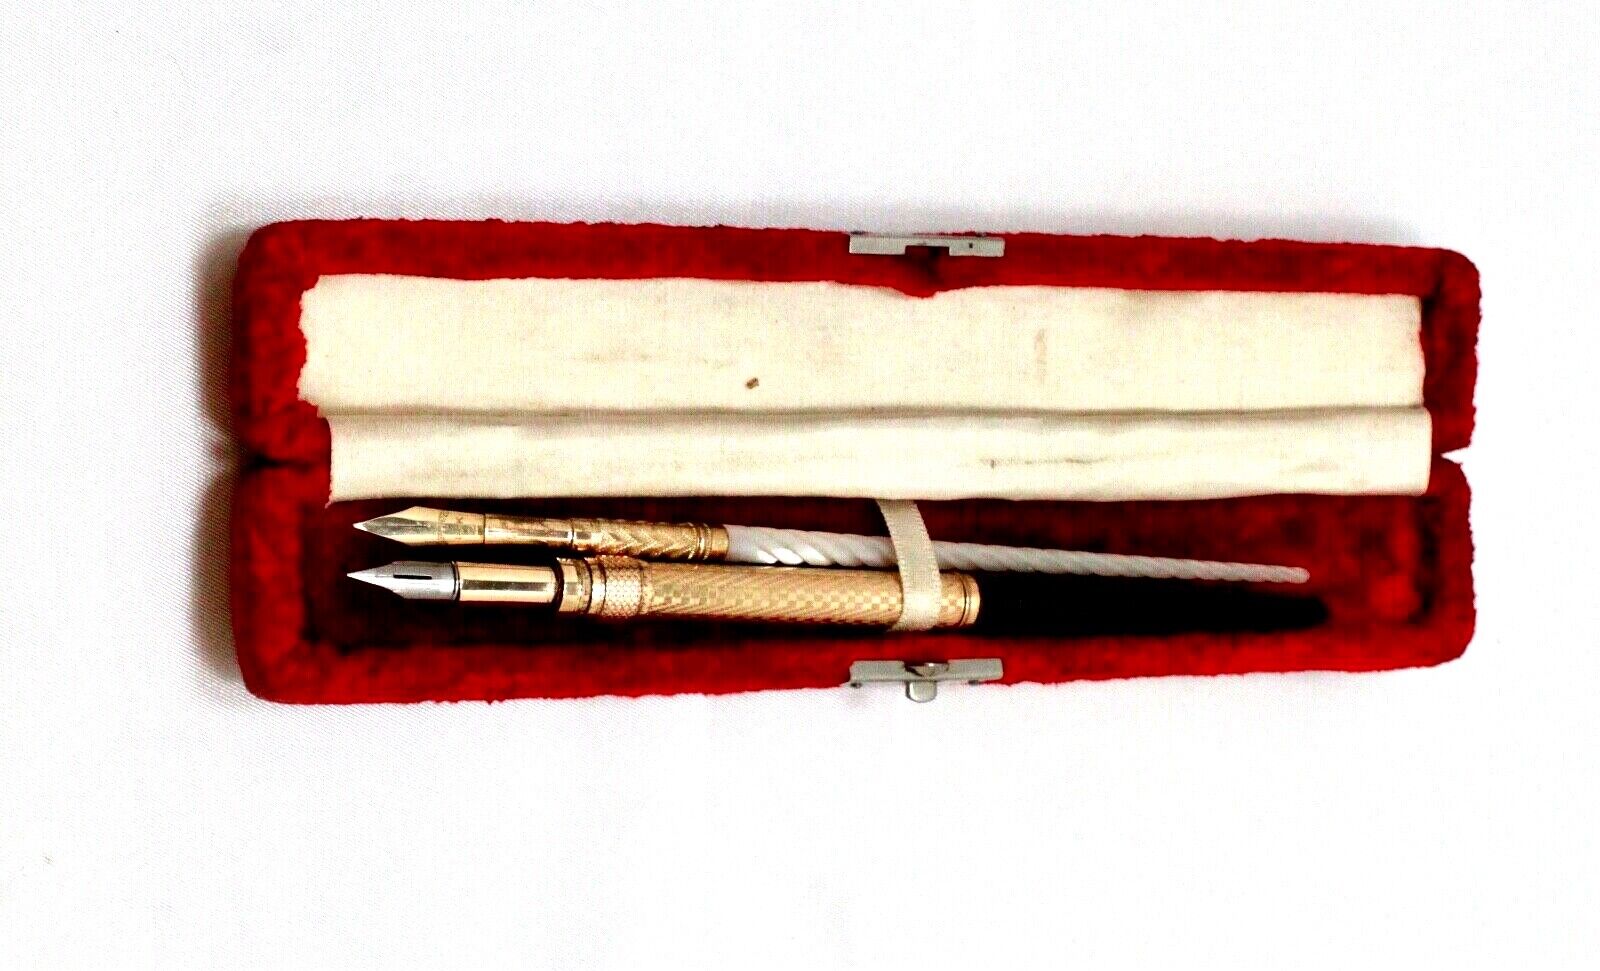 VINTAGE FOUNTAIN PEN CALLIGRAPHY INK NIB SET WITH GOLD TIP AND MOTHER OF PEARL 